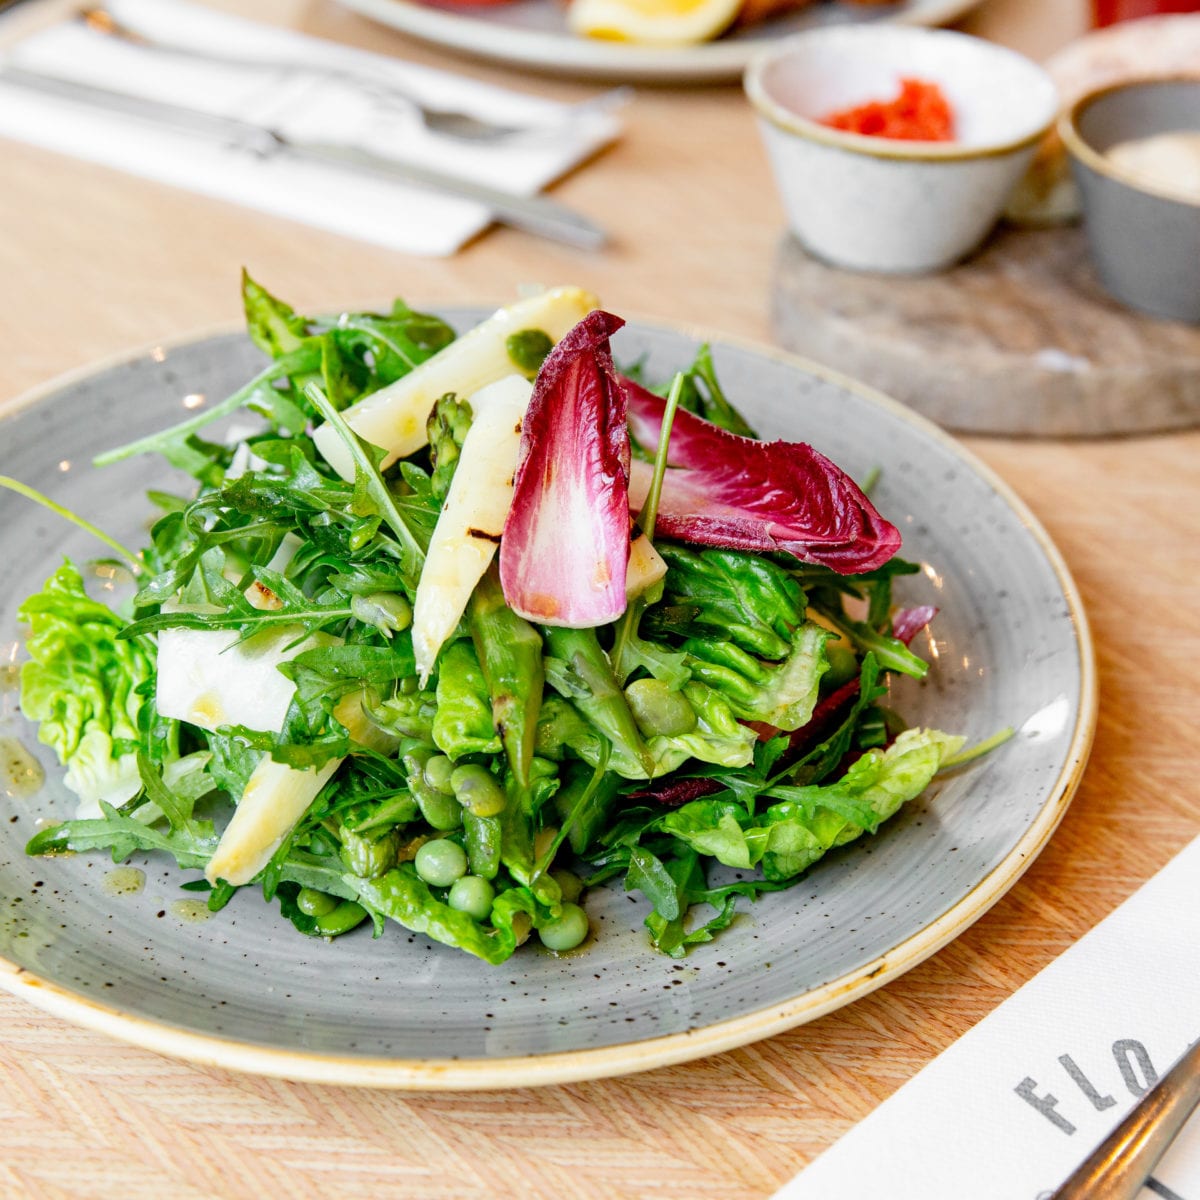 A green asparagus salad, served with peas, green beans and broad beans.